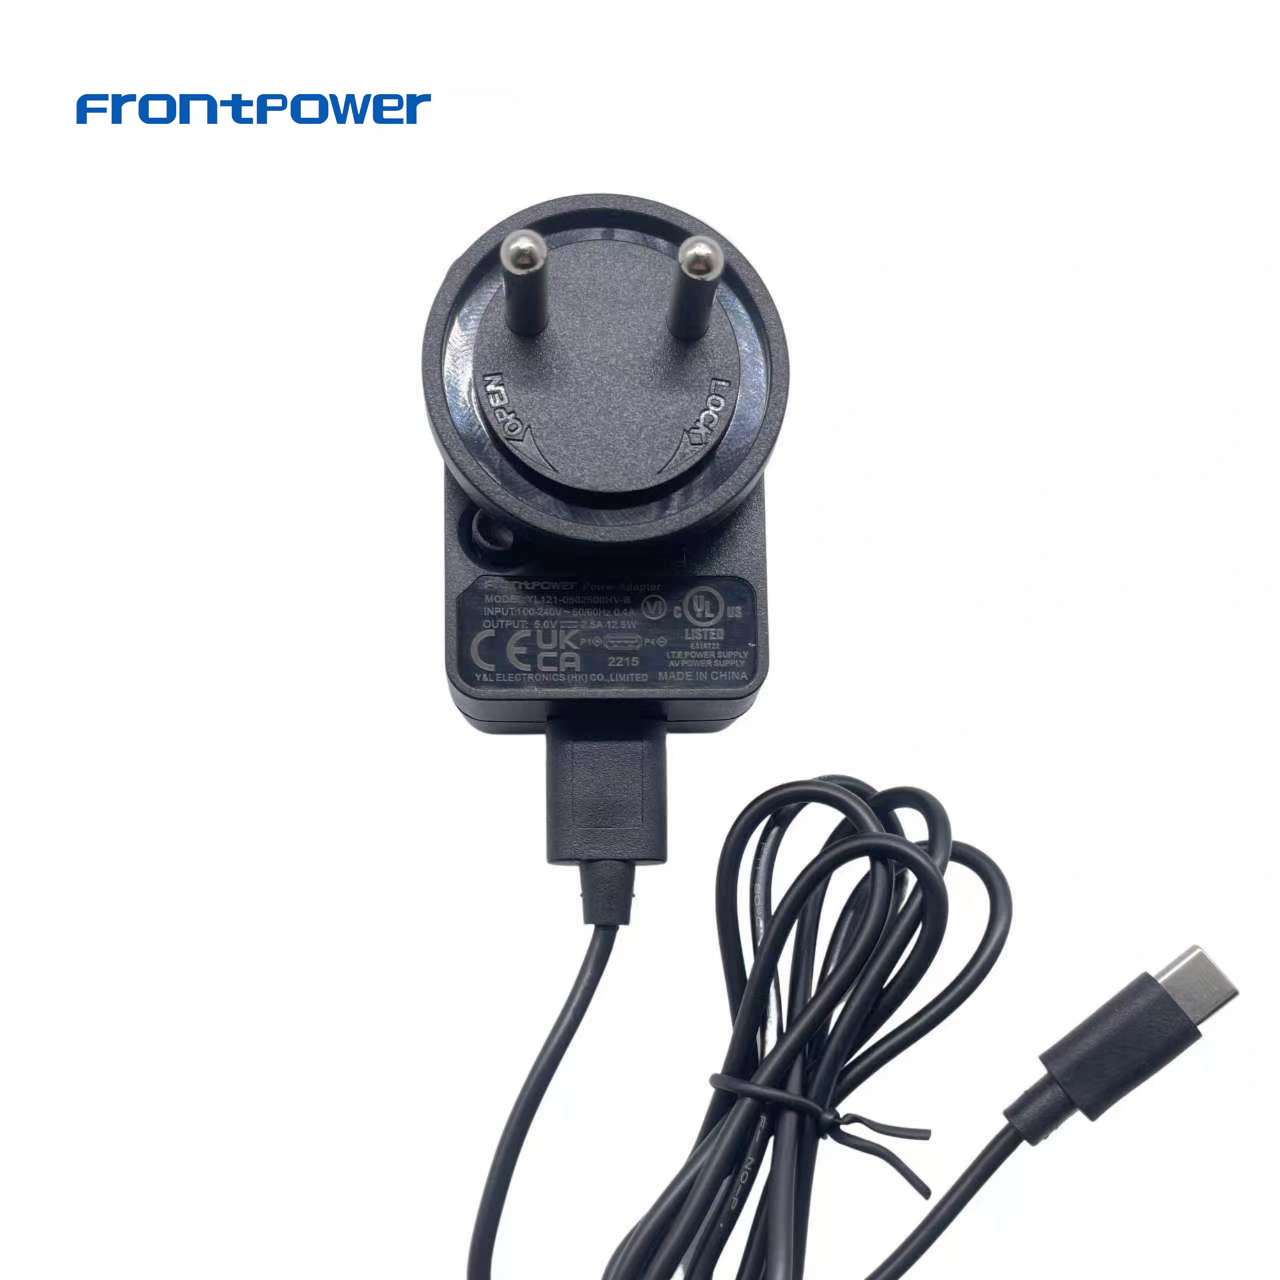 5V 2.5A 3A detachable type power adapter with US/UK/EU/AU/IN plug with BIS UL UKCA CE GS SAA certification